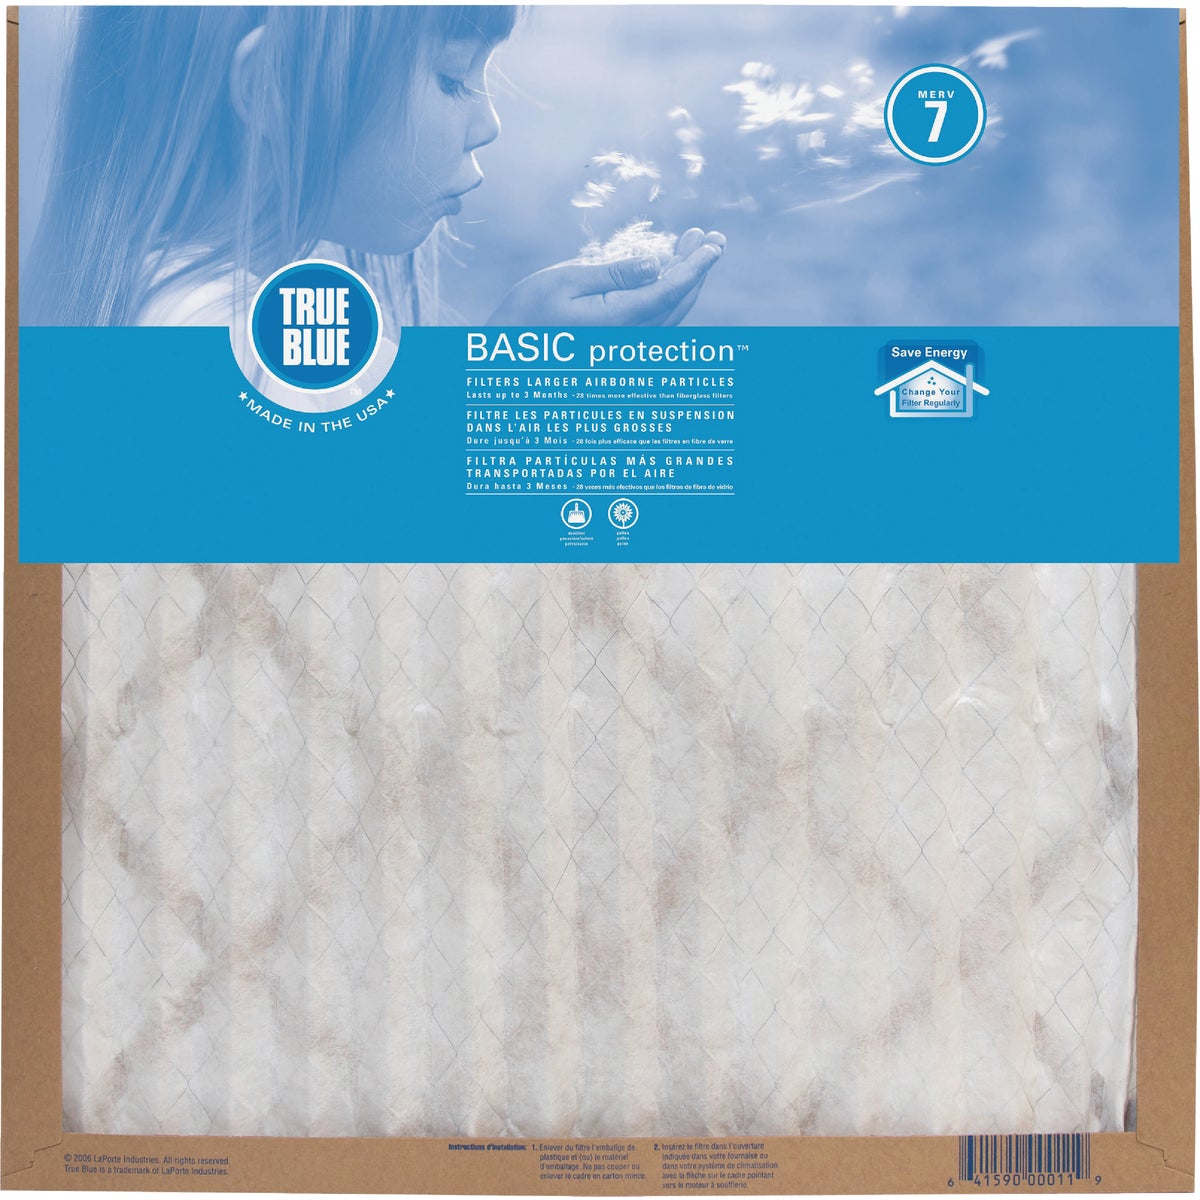 Item 405059, Filters airborne allergens including dust, dirt and pollen.